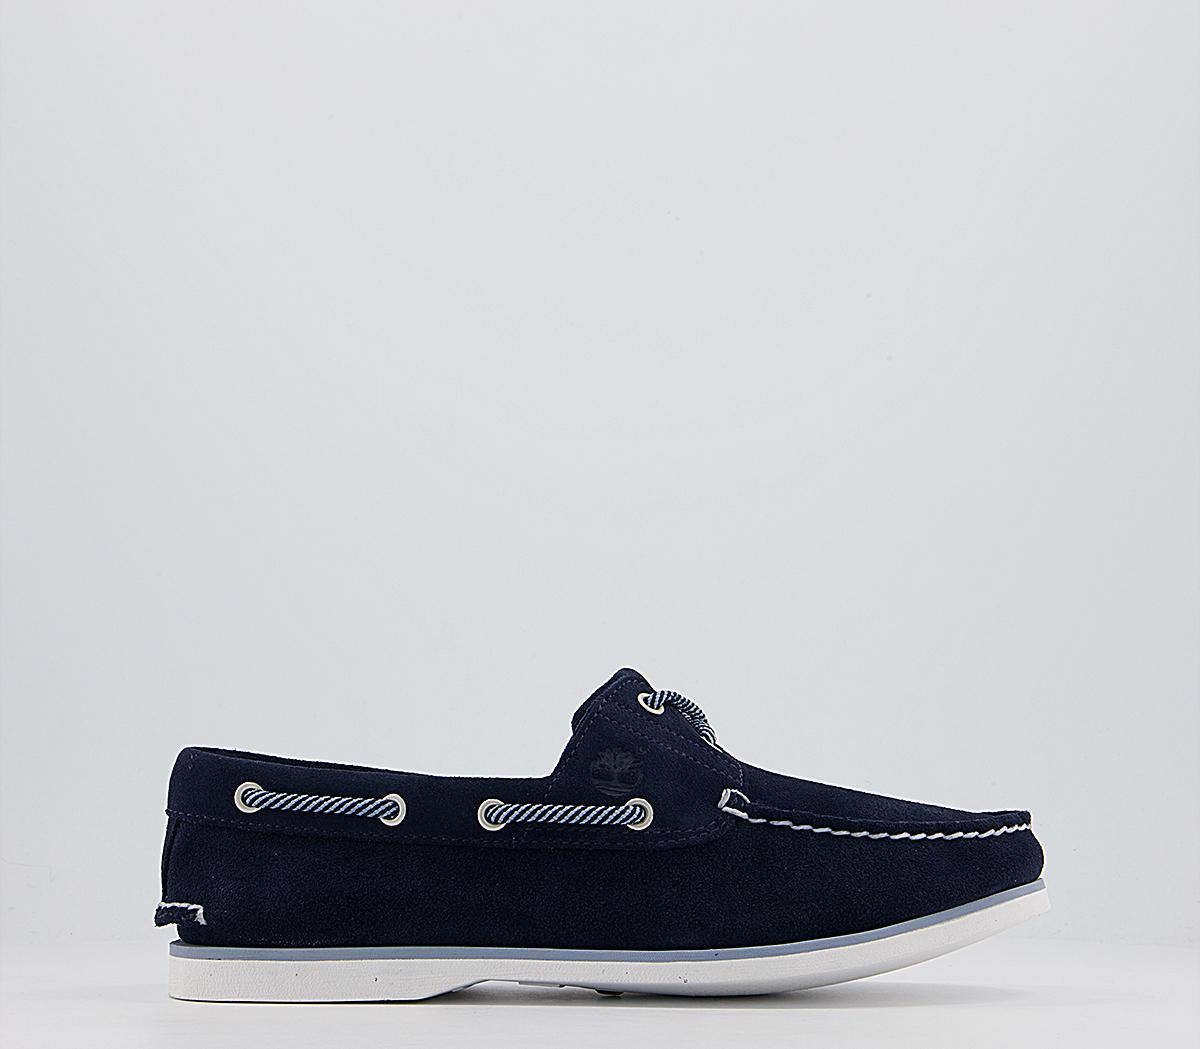 TimberlandNew Boat ShoesNavy Suede White